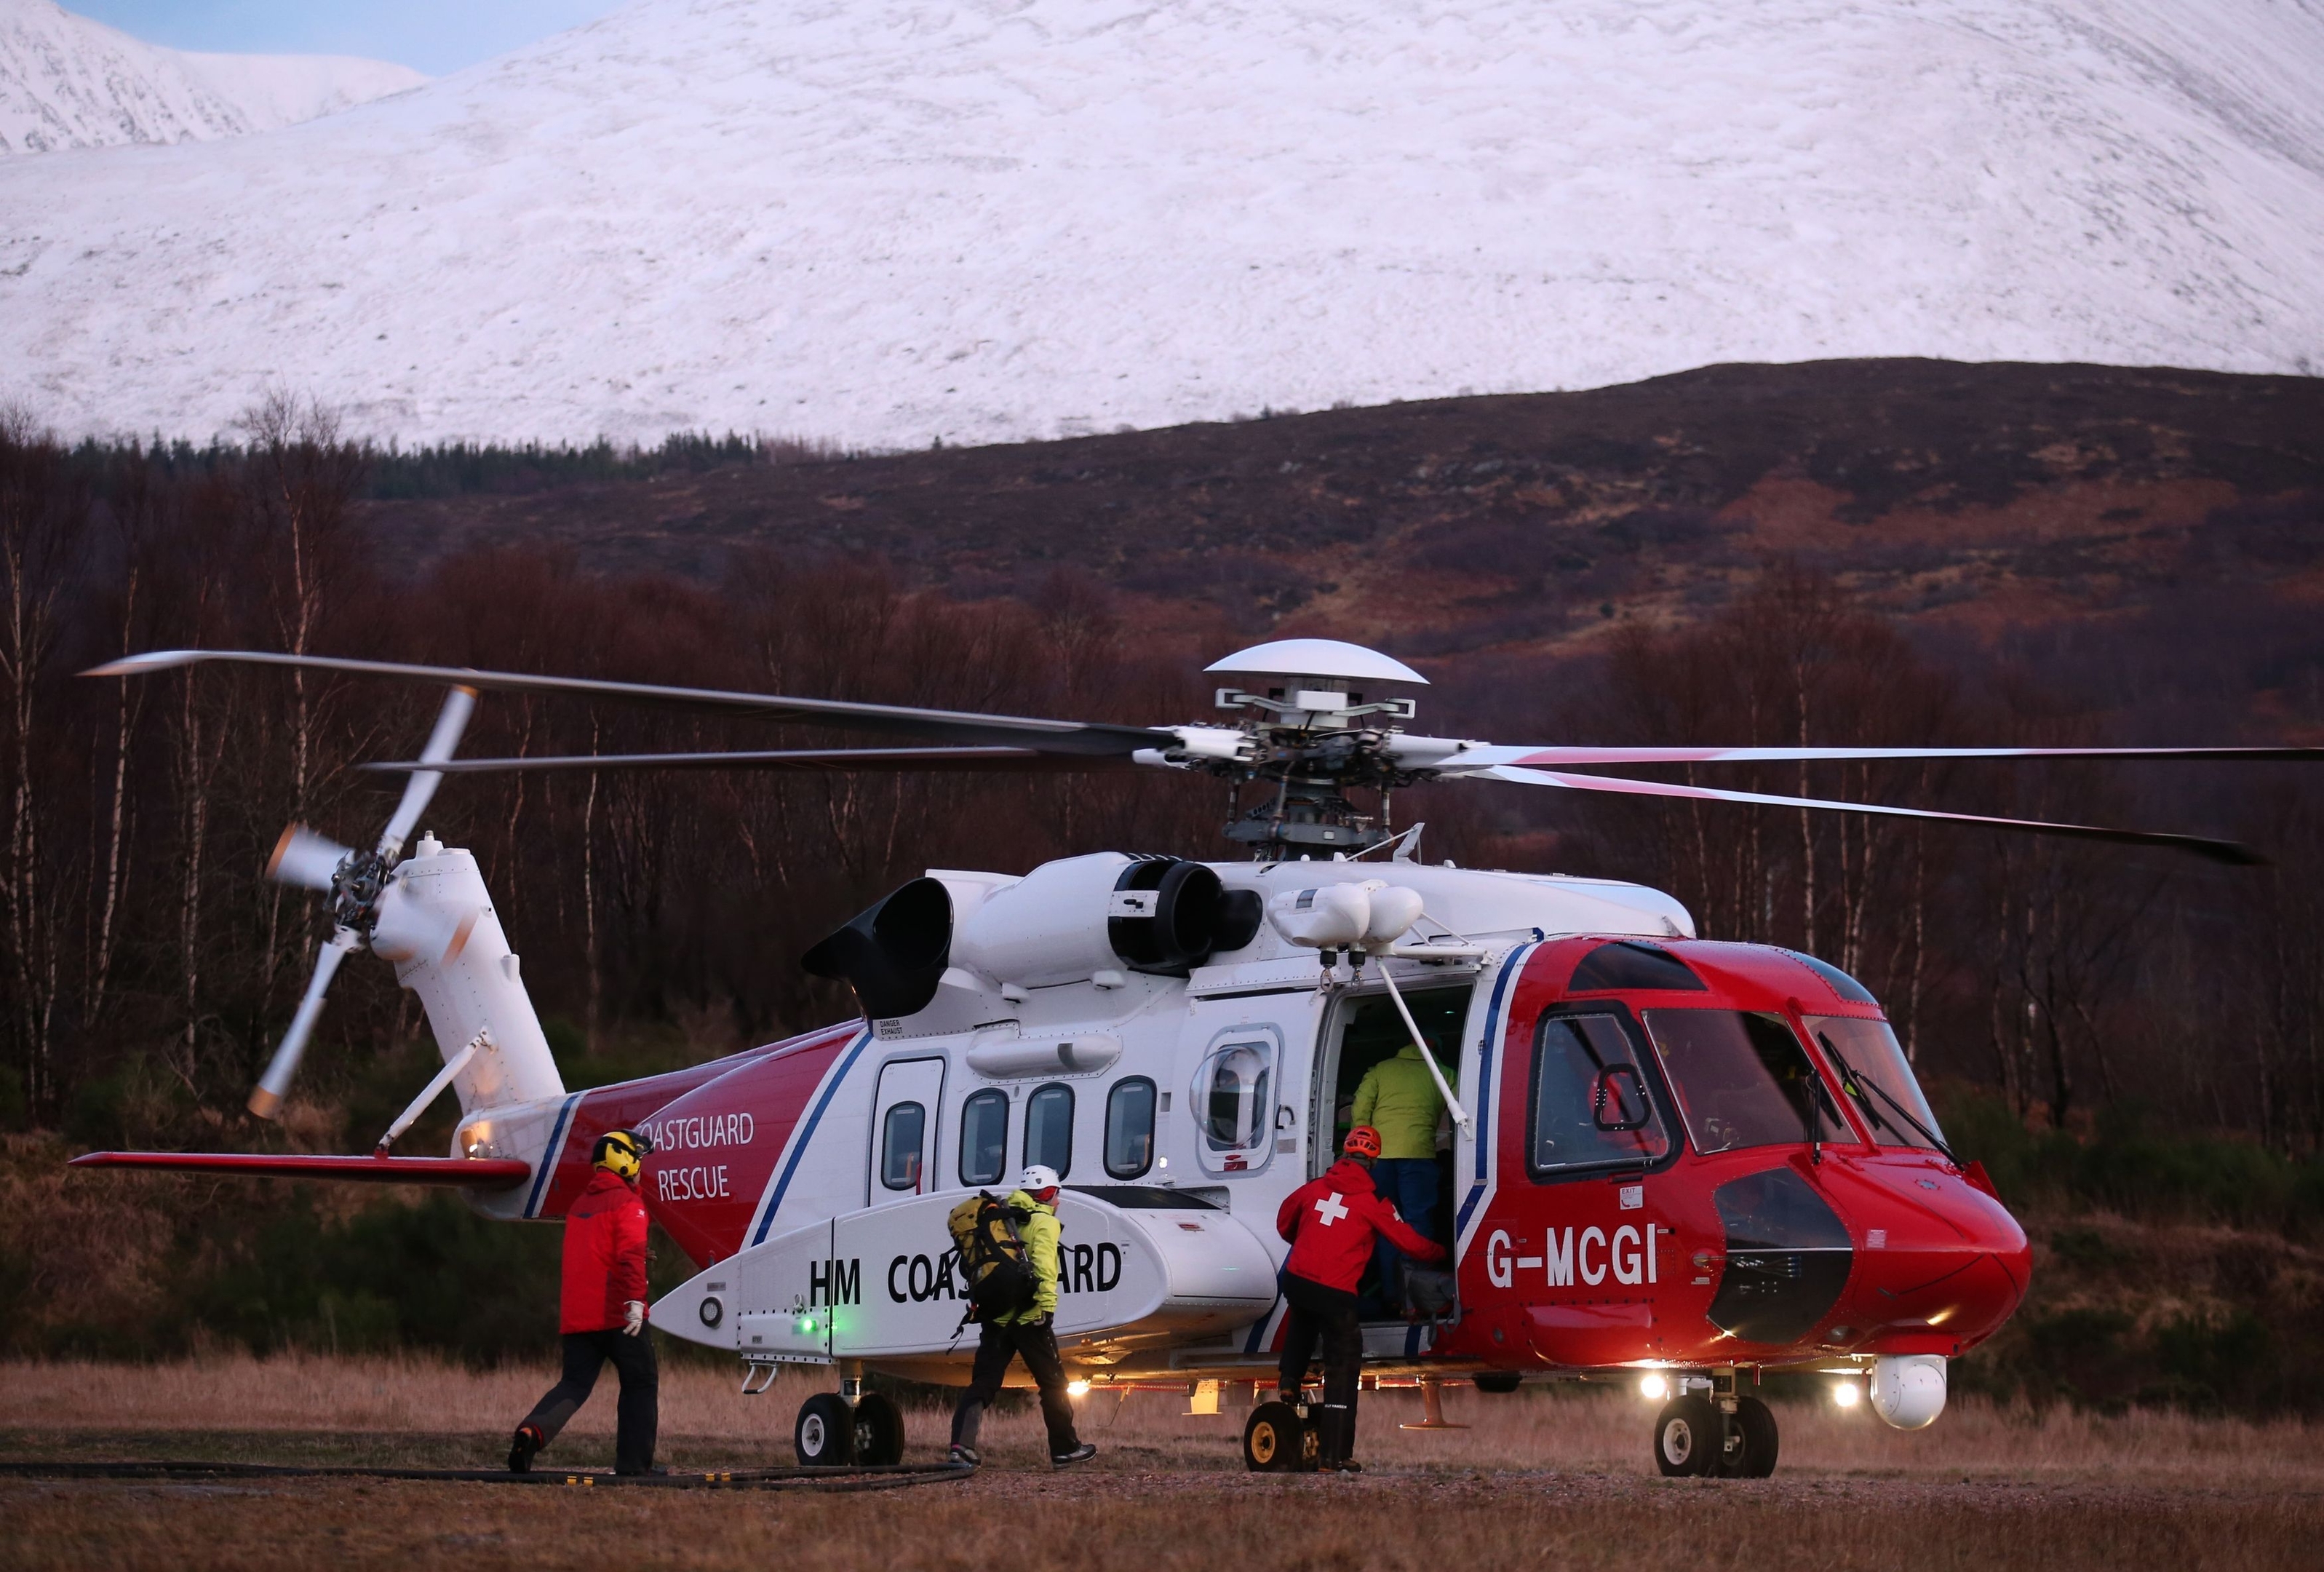 Members of the Lochaber Mountain Rescue team board a search and rescue helicopter after an avalanche